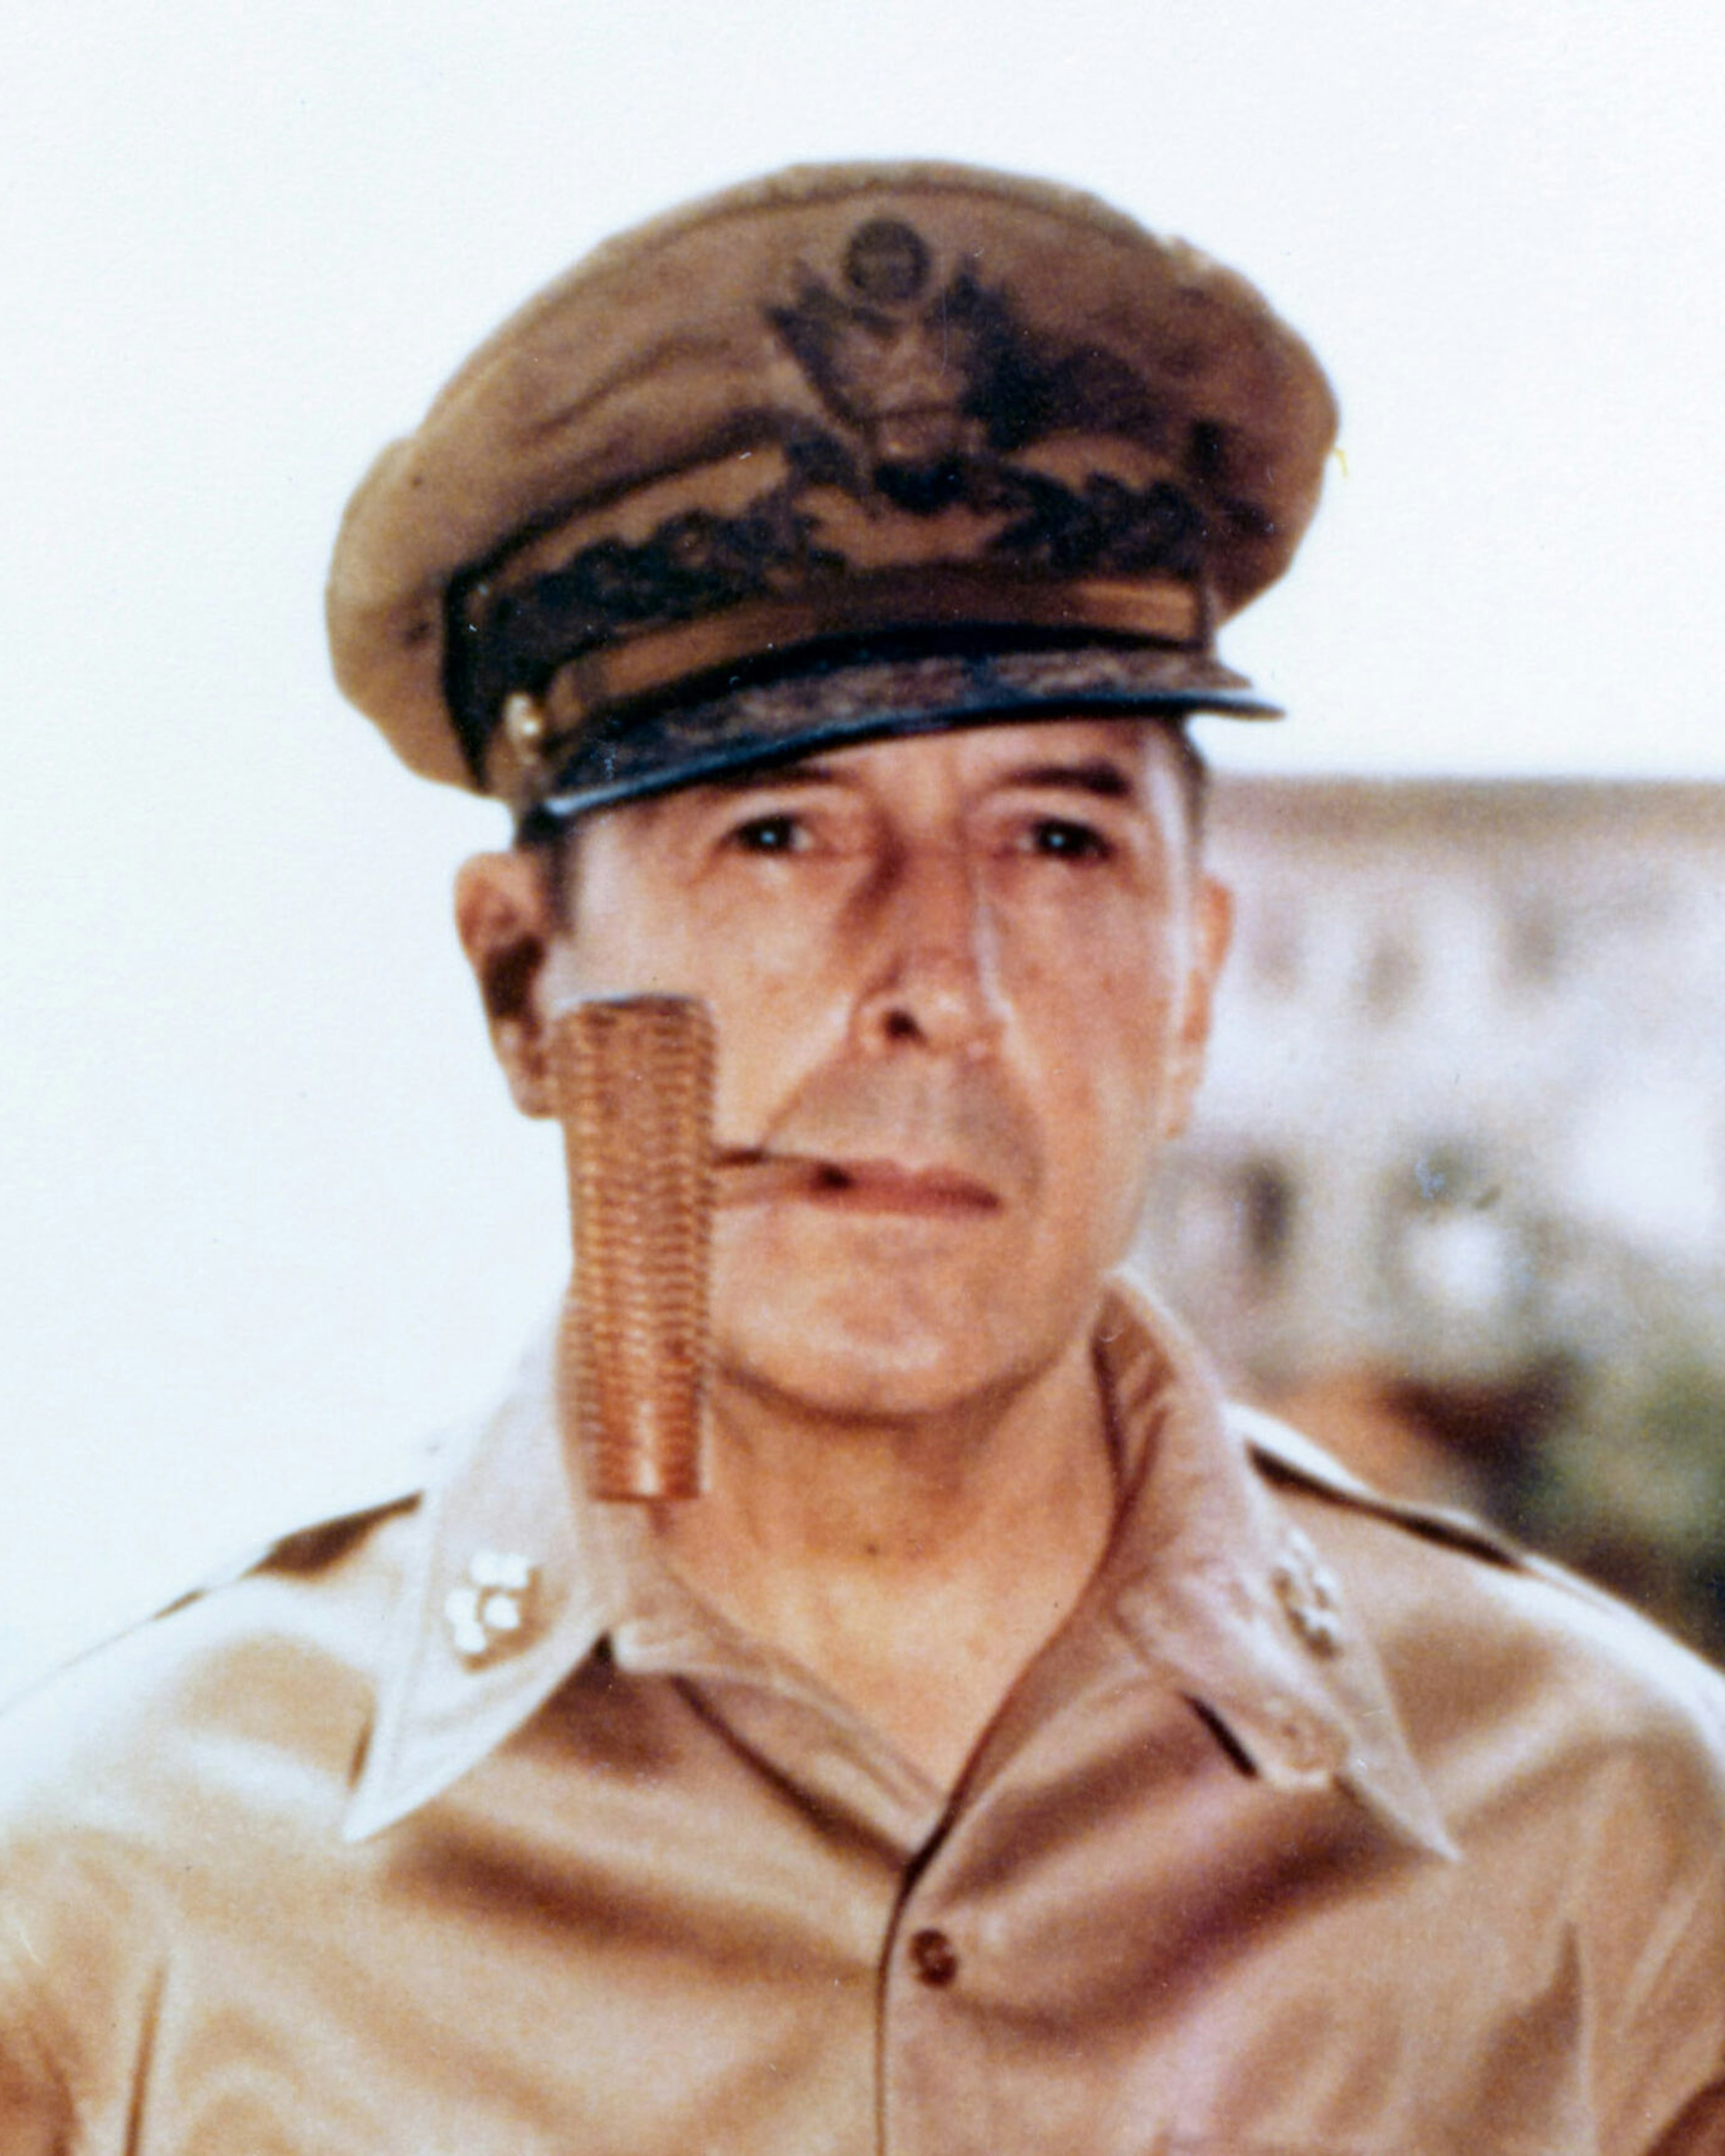 General of the Army Douglas MacArthur smoking his corncob pipe, probably at Manila, Philippine Islands, 2 August 1945. Photograph from the Army Signal Corps Collection in the U.S. National Archives.